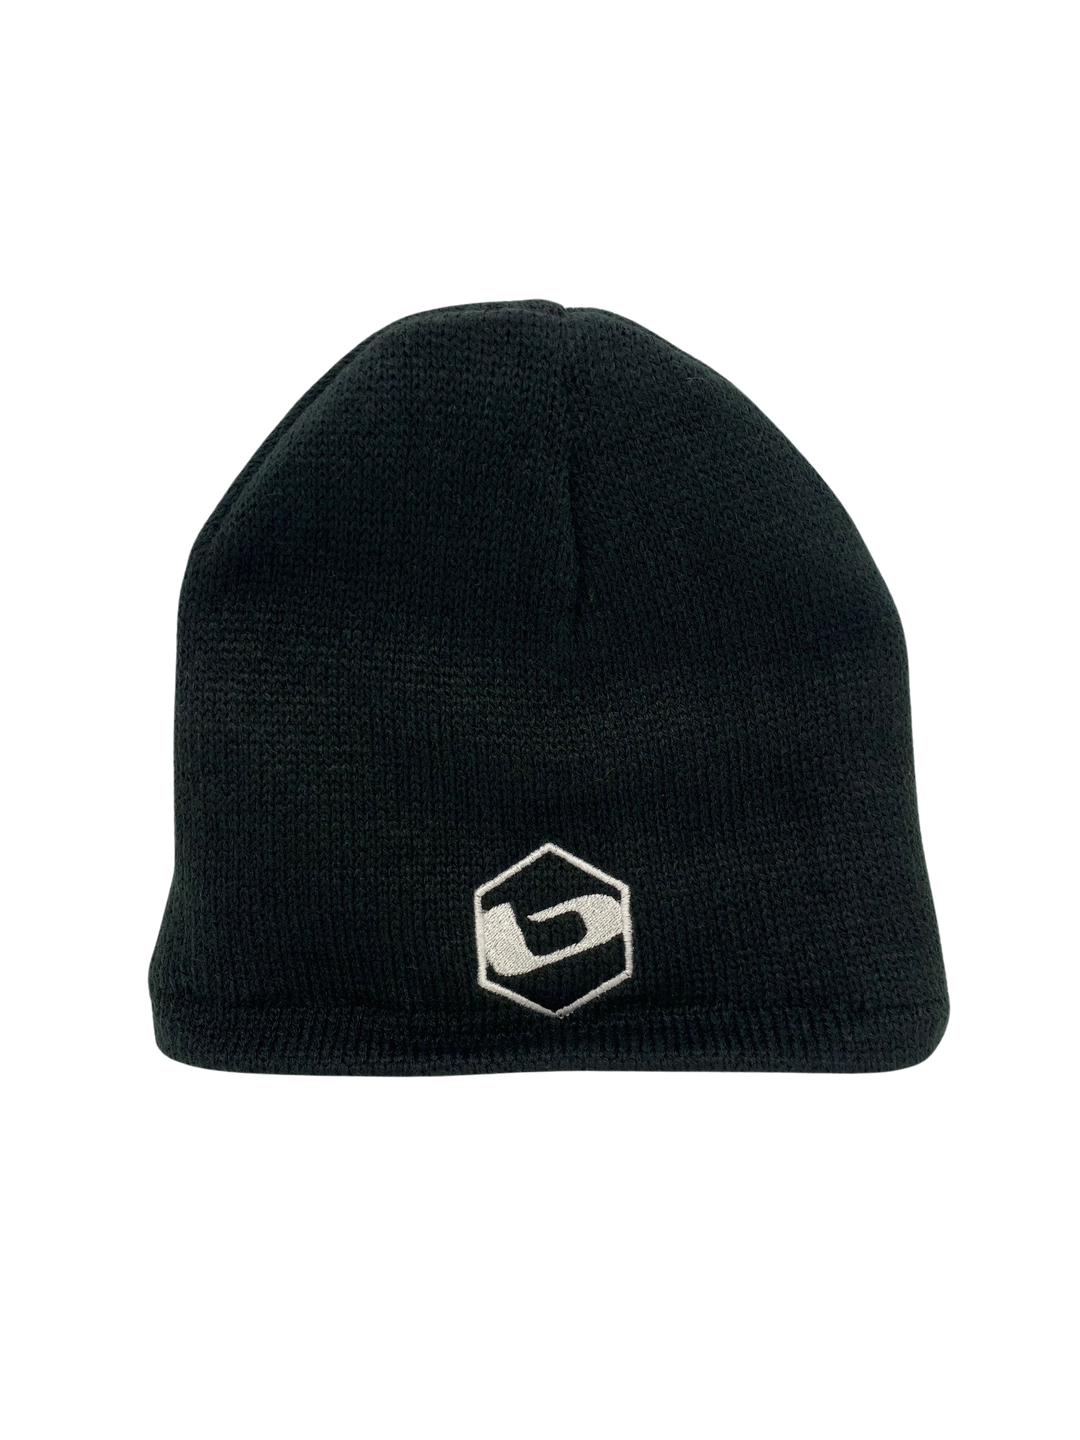 Beanies by BASE